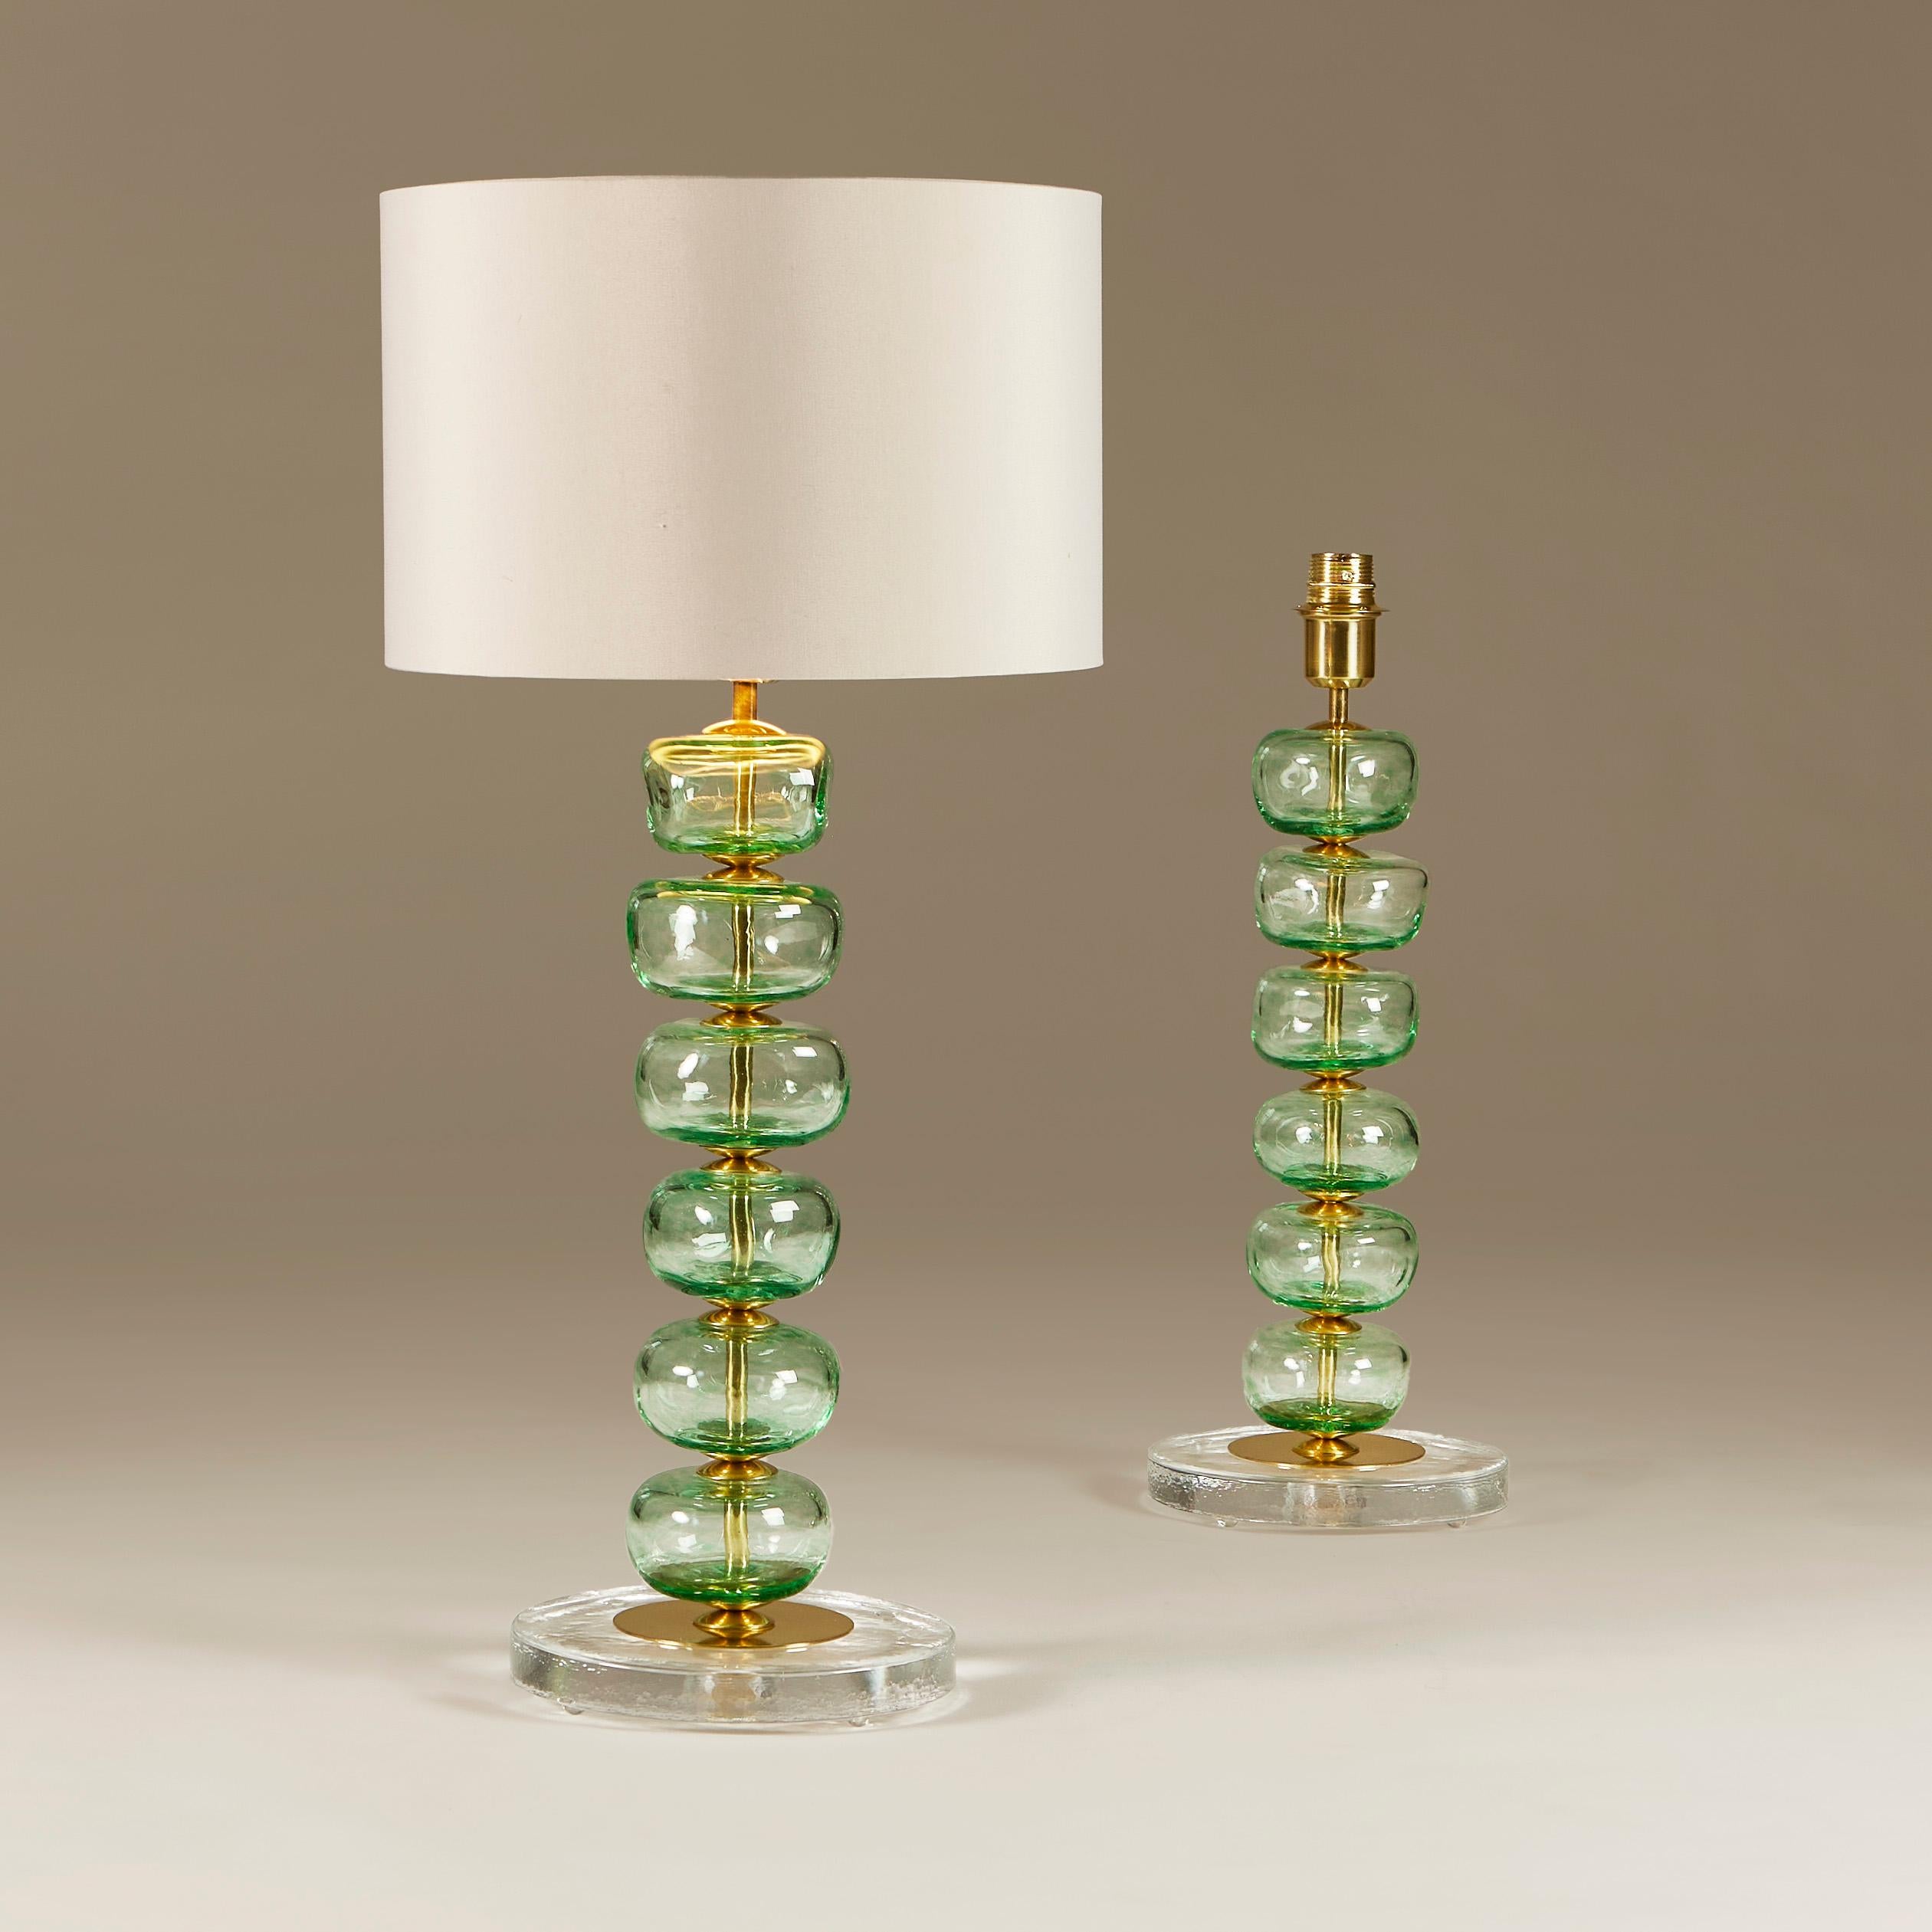 Elegant pair of table lamps each consisting of six hand blown soft green sculptured Murano glass disks interspersed with brass detailing. Sits on circular clear glass and brass base.
Due to the handmade nature of the glass no two pieces are exactly